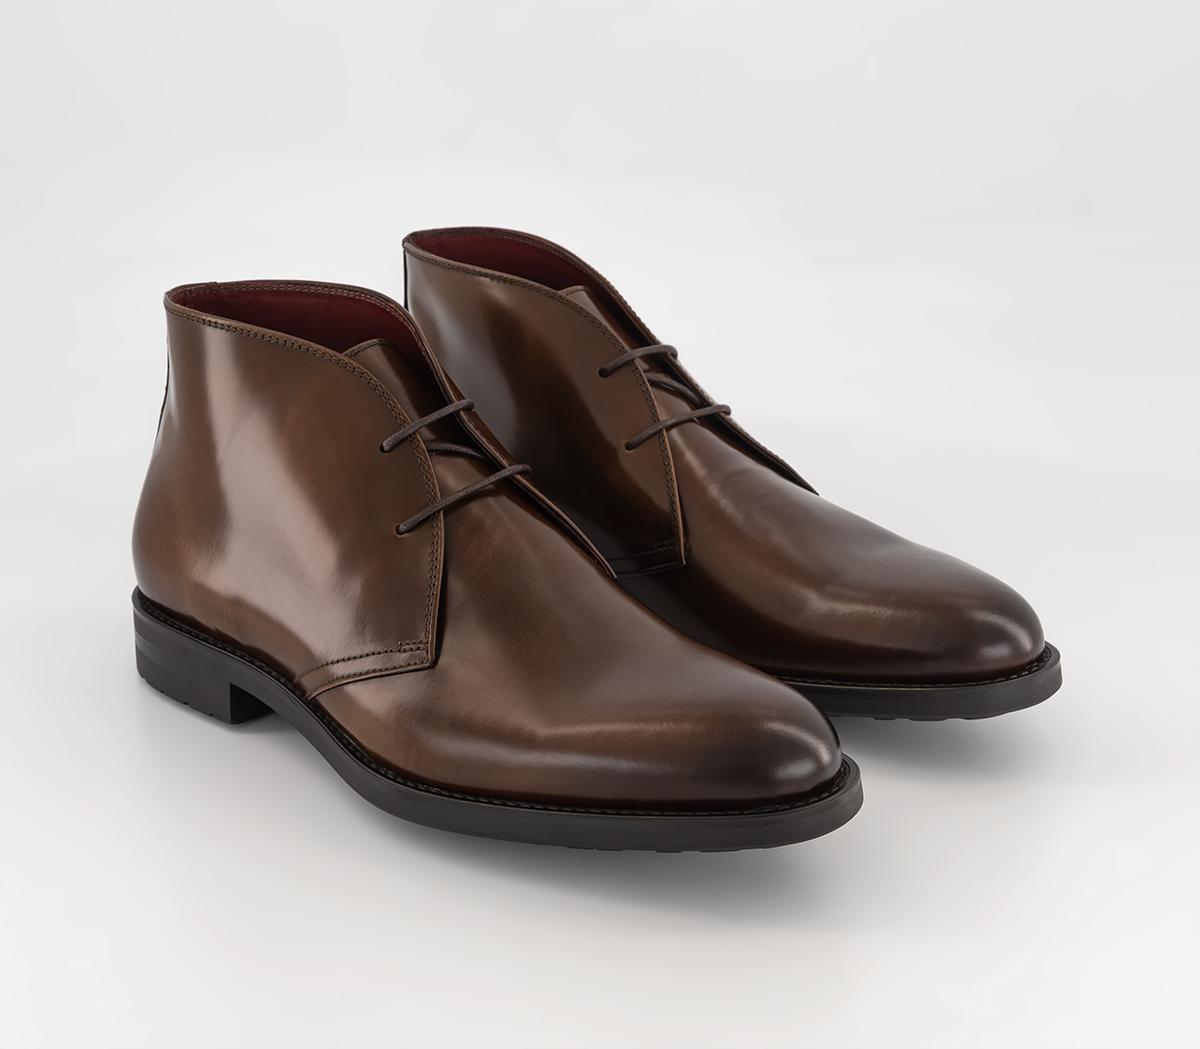 Poste Padrone Chukka Boots Tan Leather - Men’s Boots